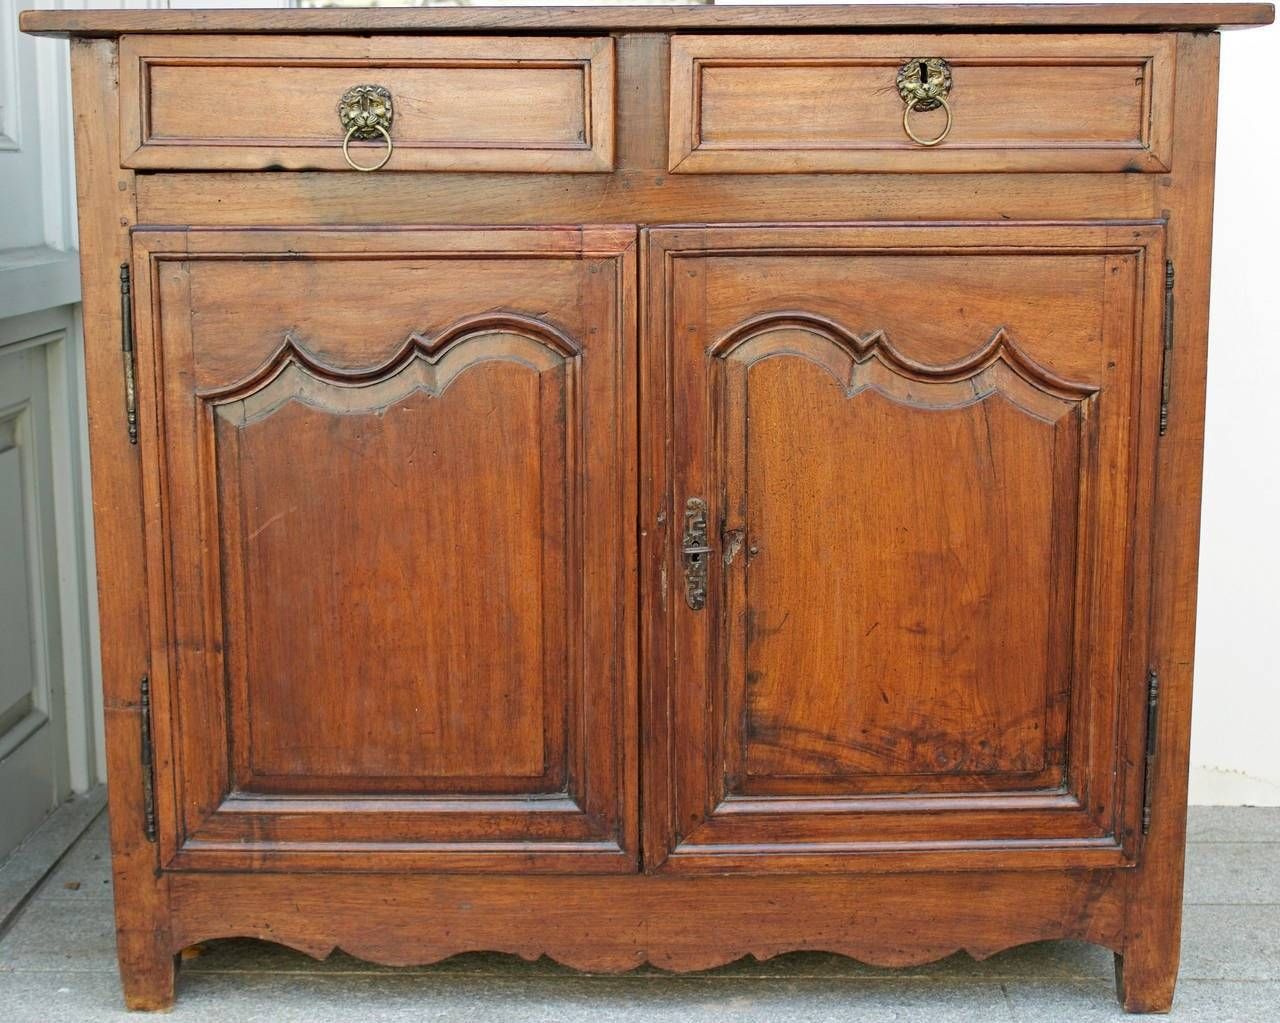 18th Century French Country Louis Xiv Walnut Buffet Or Sideboard Pertaining To French Country Sideboards (View 12 of 20)